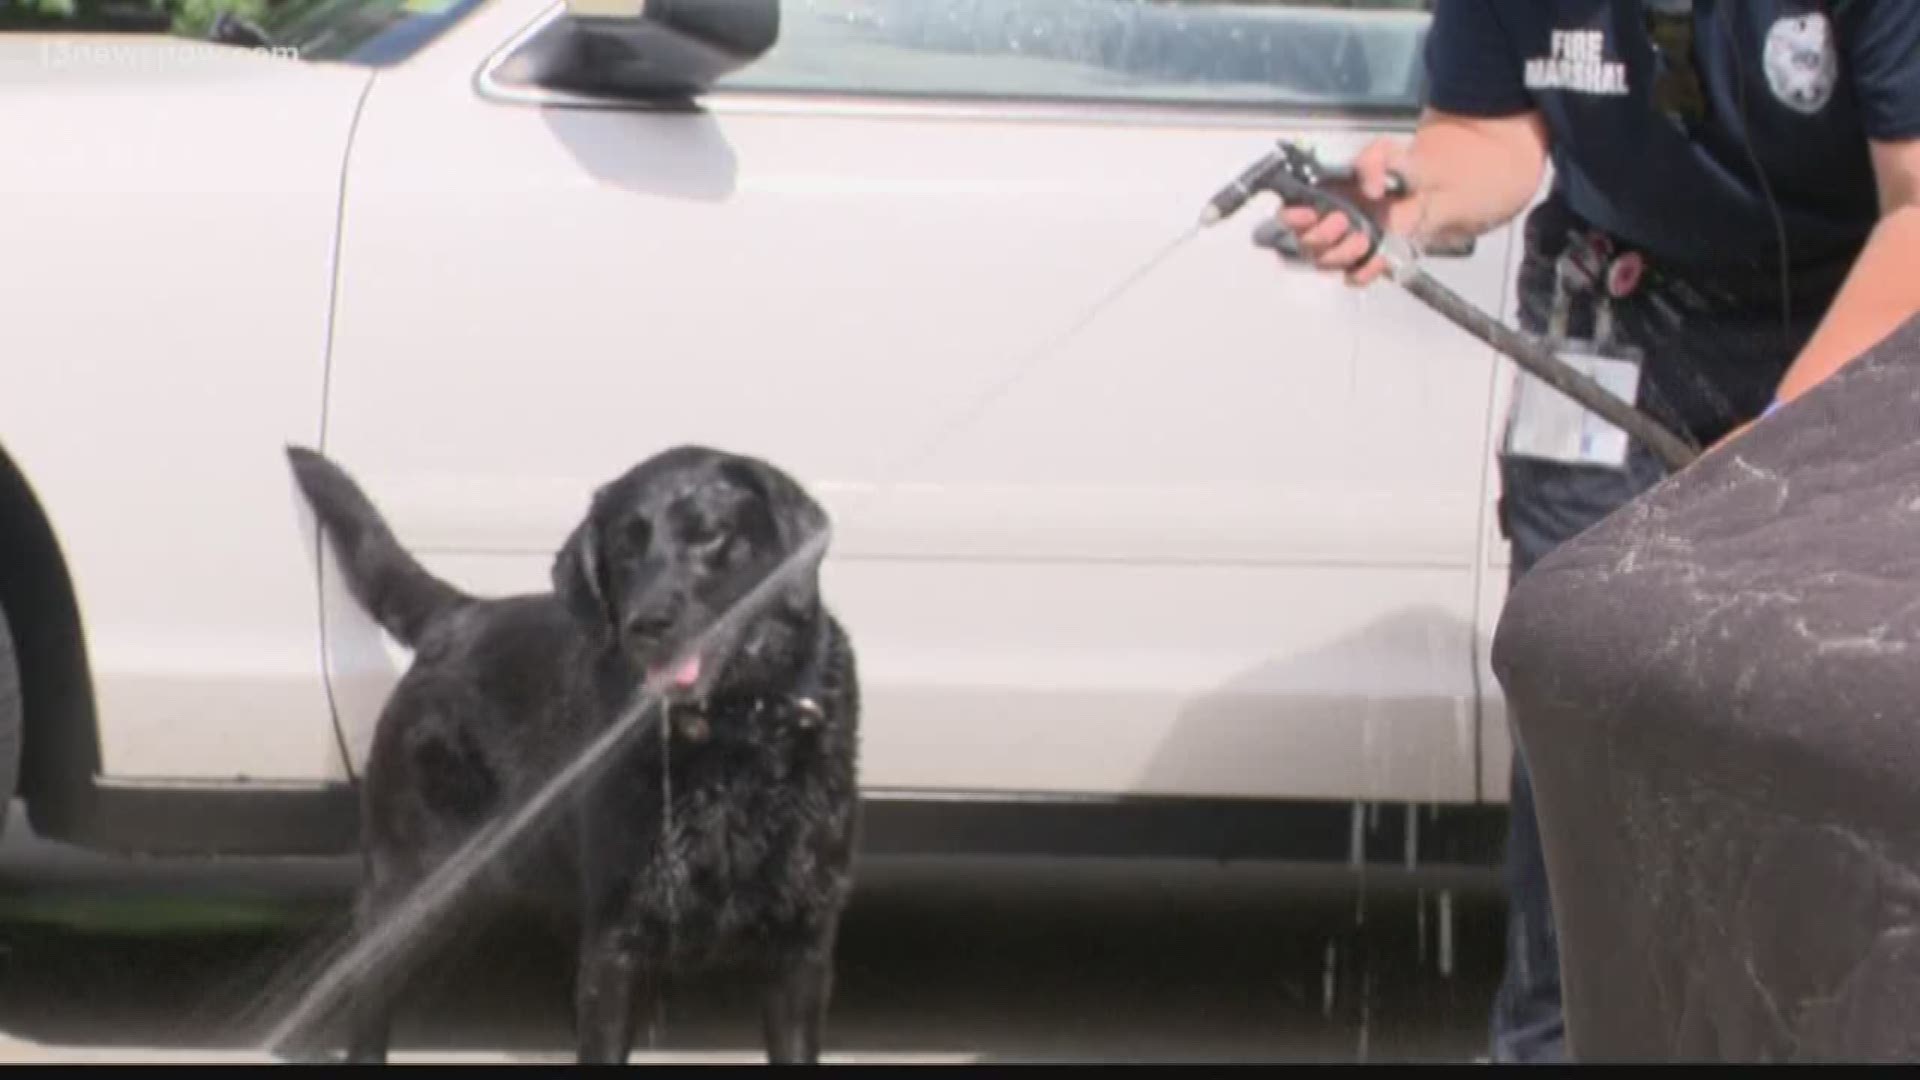 A Virginia Beach Fire Department K9 took her talents to St. Thomas to help crack a case!